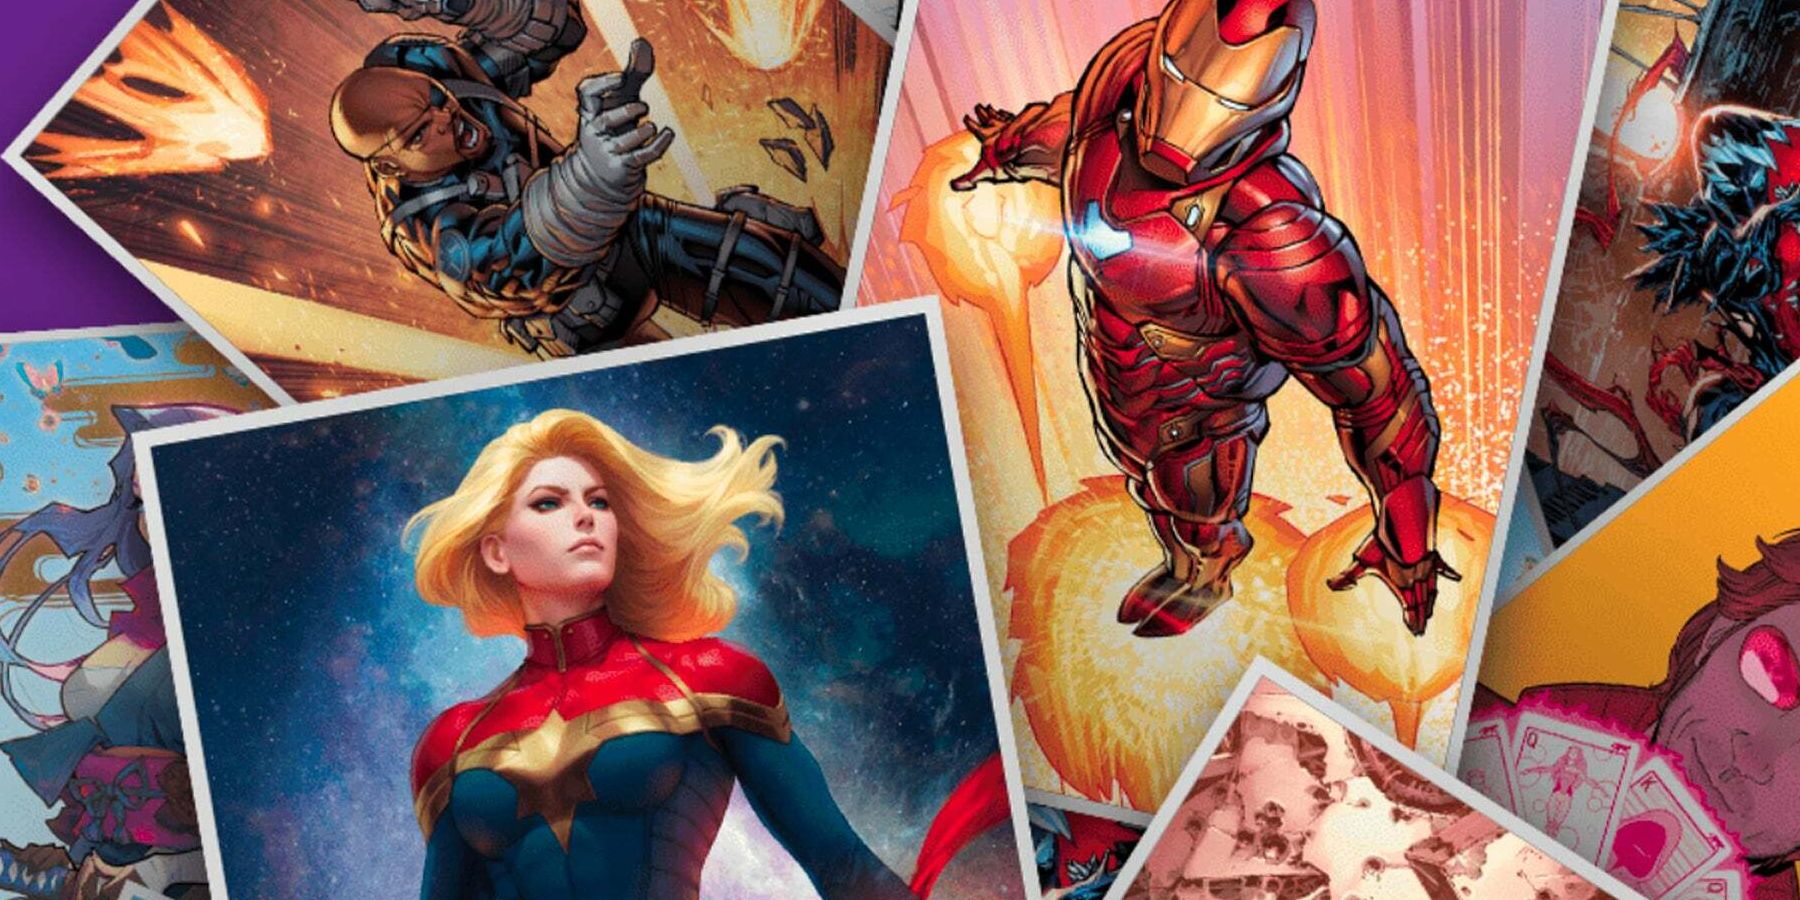 14 Fan-Made Marvel Snap Cards by @WillowCCG 